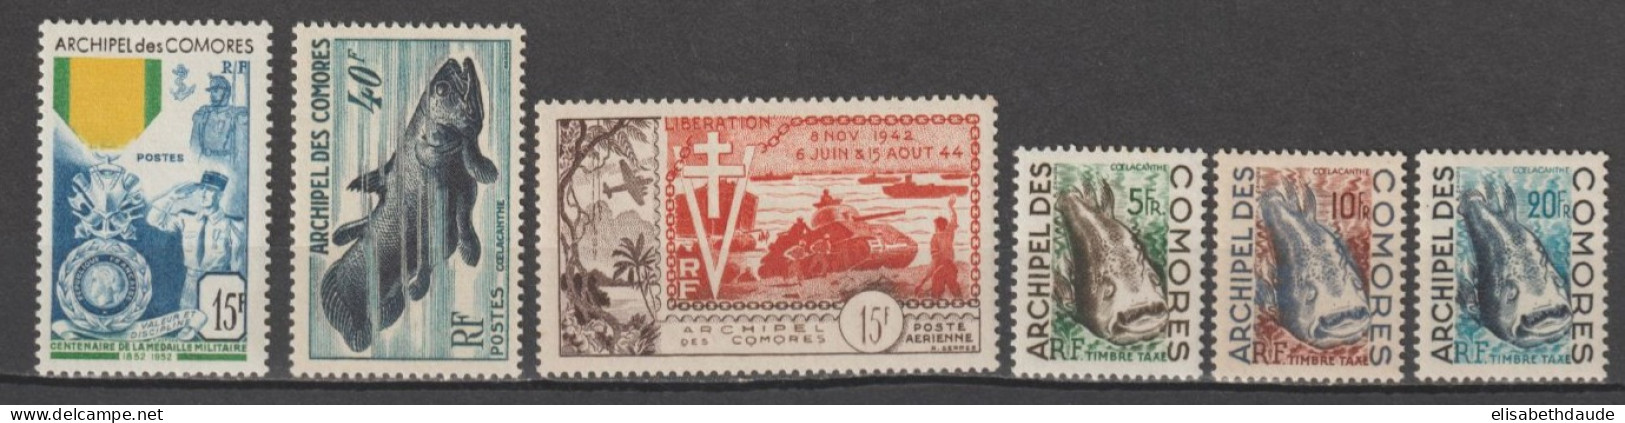 COMORES - 1952/1954 - ANNEES COMPLETES Avec POSTE AERIENNE +TAXE - YVERT N°12/13 + A4 * MLH  - COTE Pour * = 135.5 EUR. - Unused Stamps